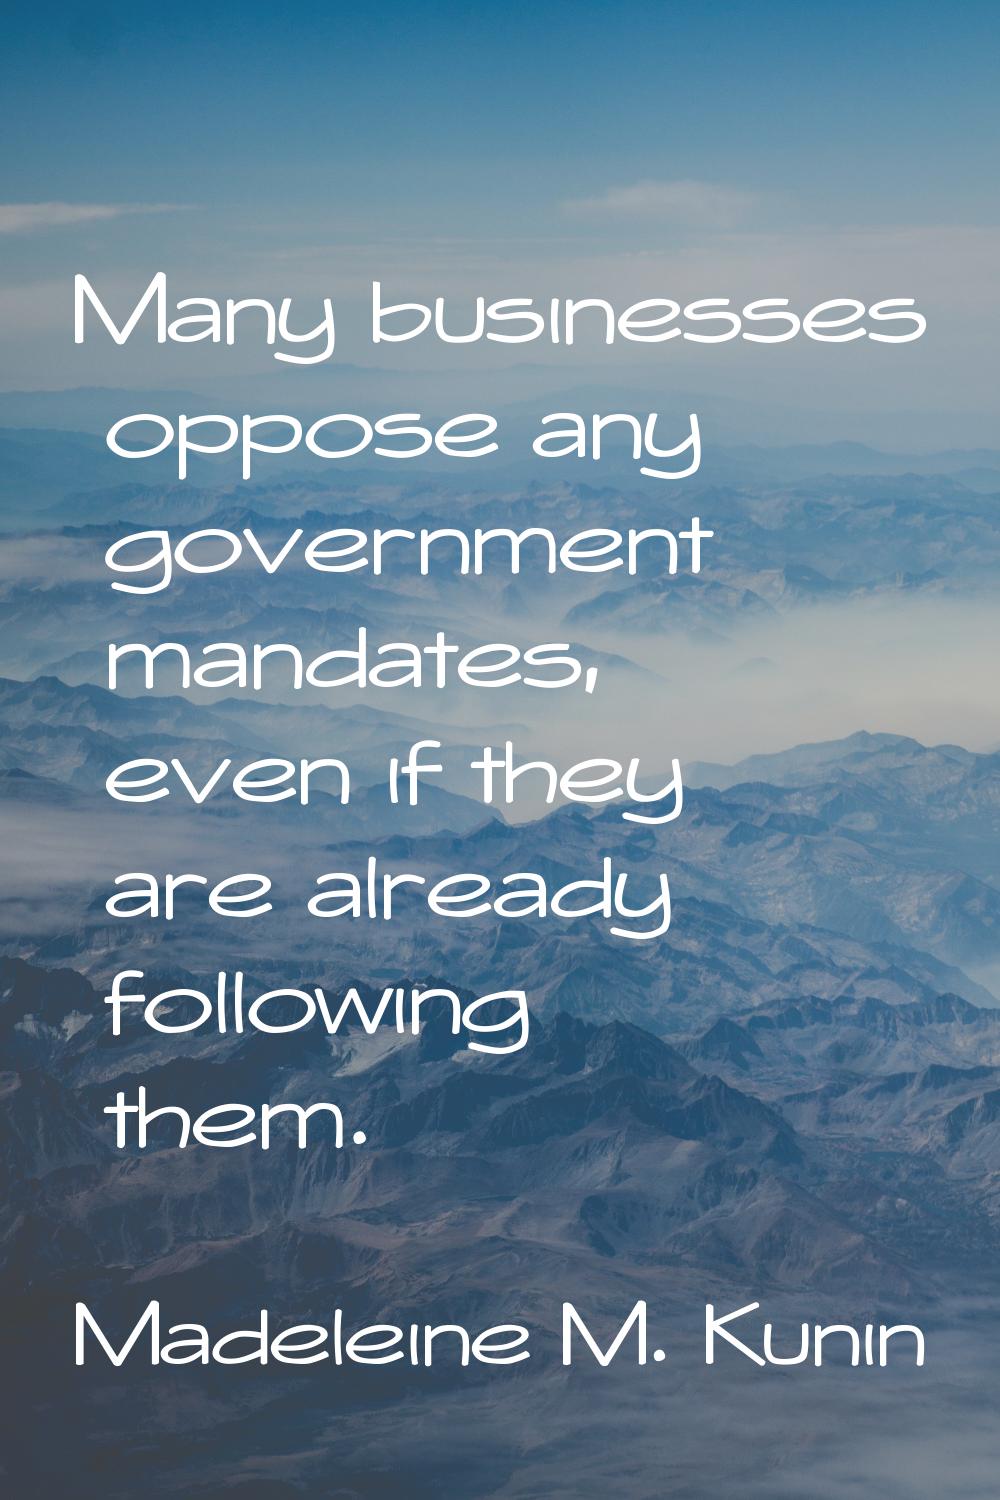 Many businesses oppose any government mandates, even if they are already following them.